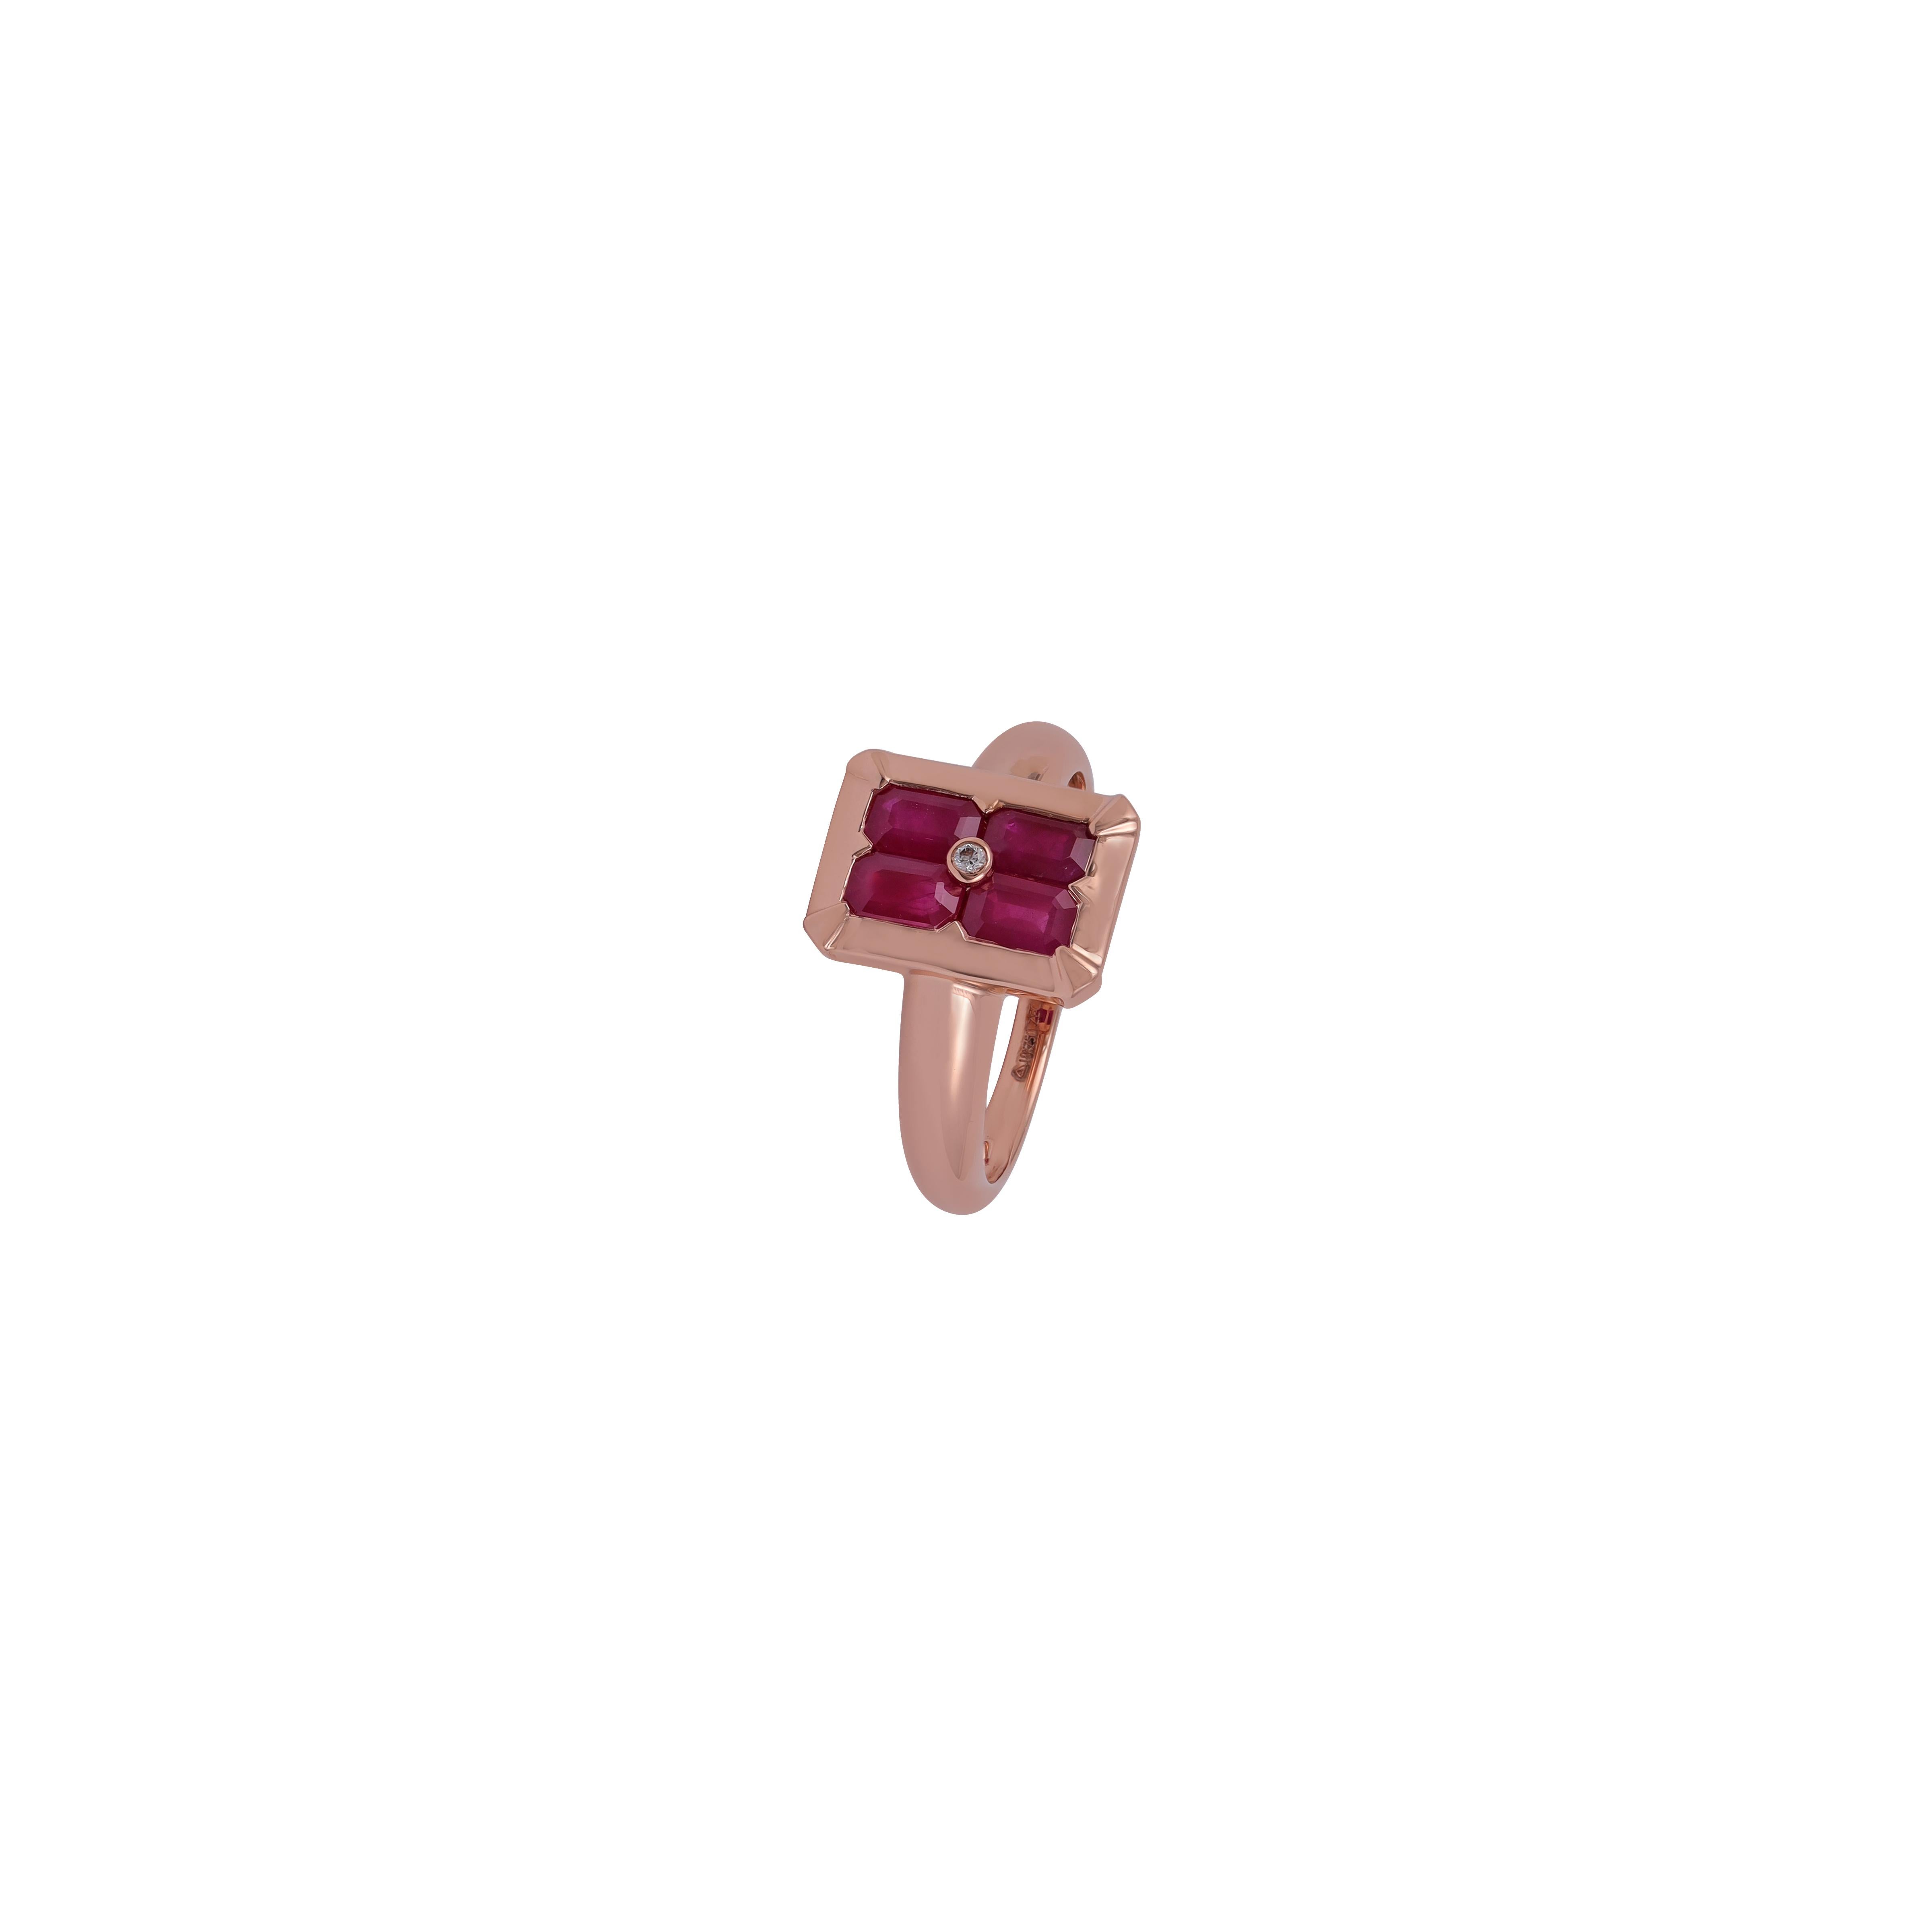 Octagon Cut Ruby Ring Studded in 18k Rose Gold For Sale